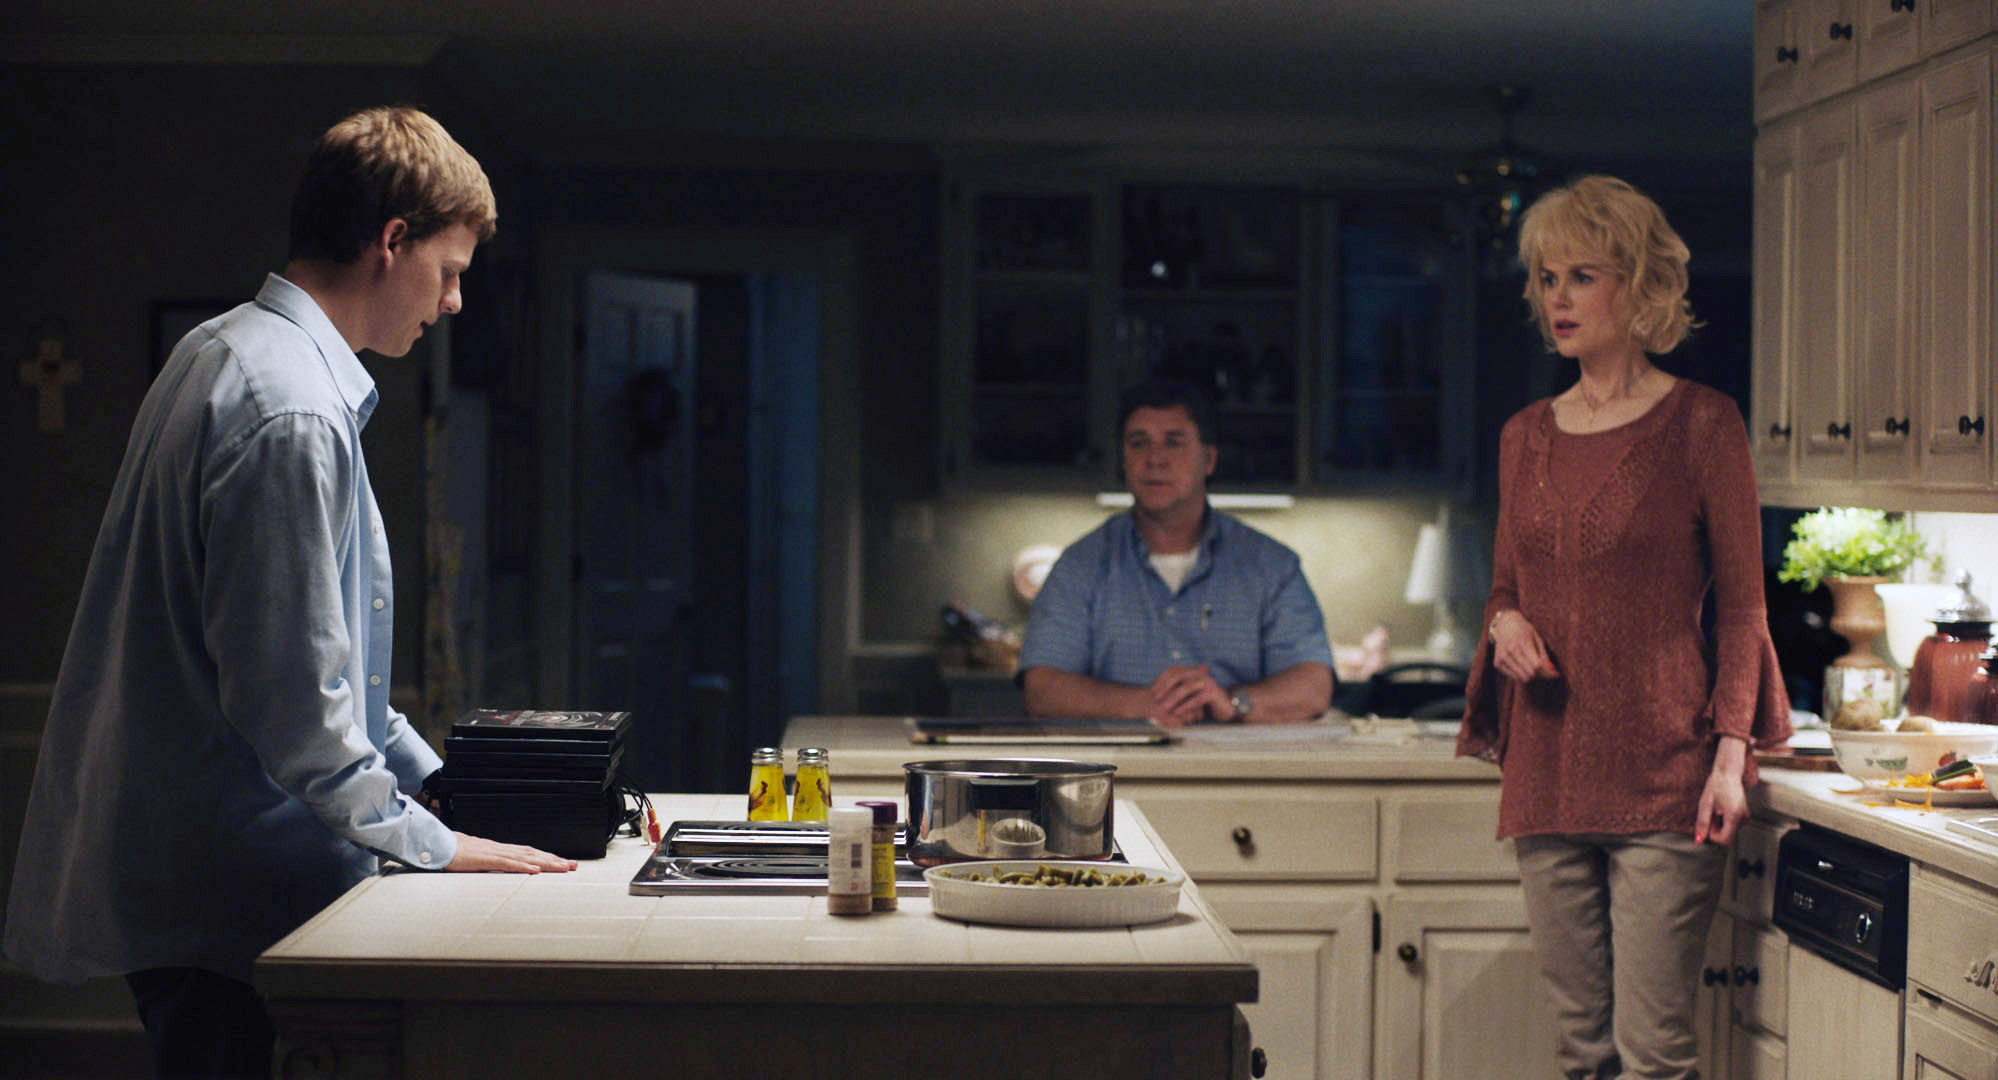 Lucas Hedges, Russell Crowe, and Nicole Kidman in a kitchen